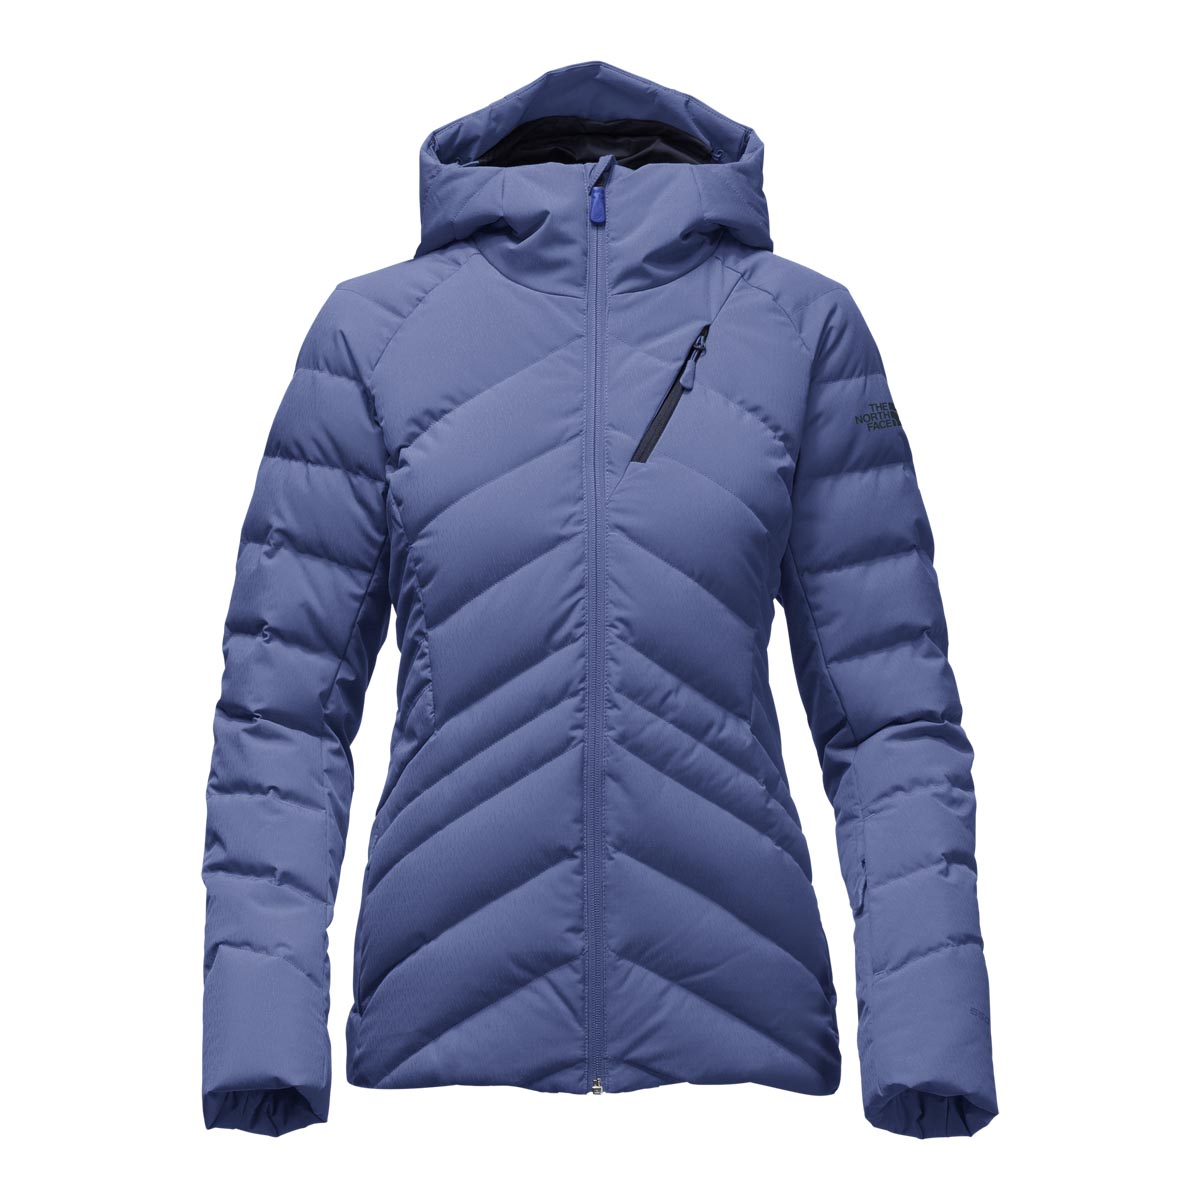 The North Face Womens Heavenly Jacket Discontinued Pricing